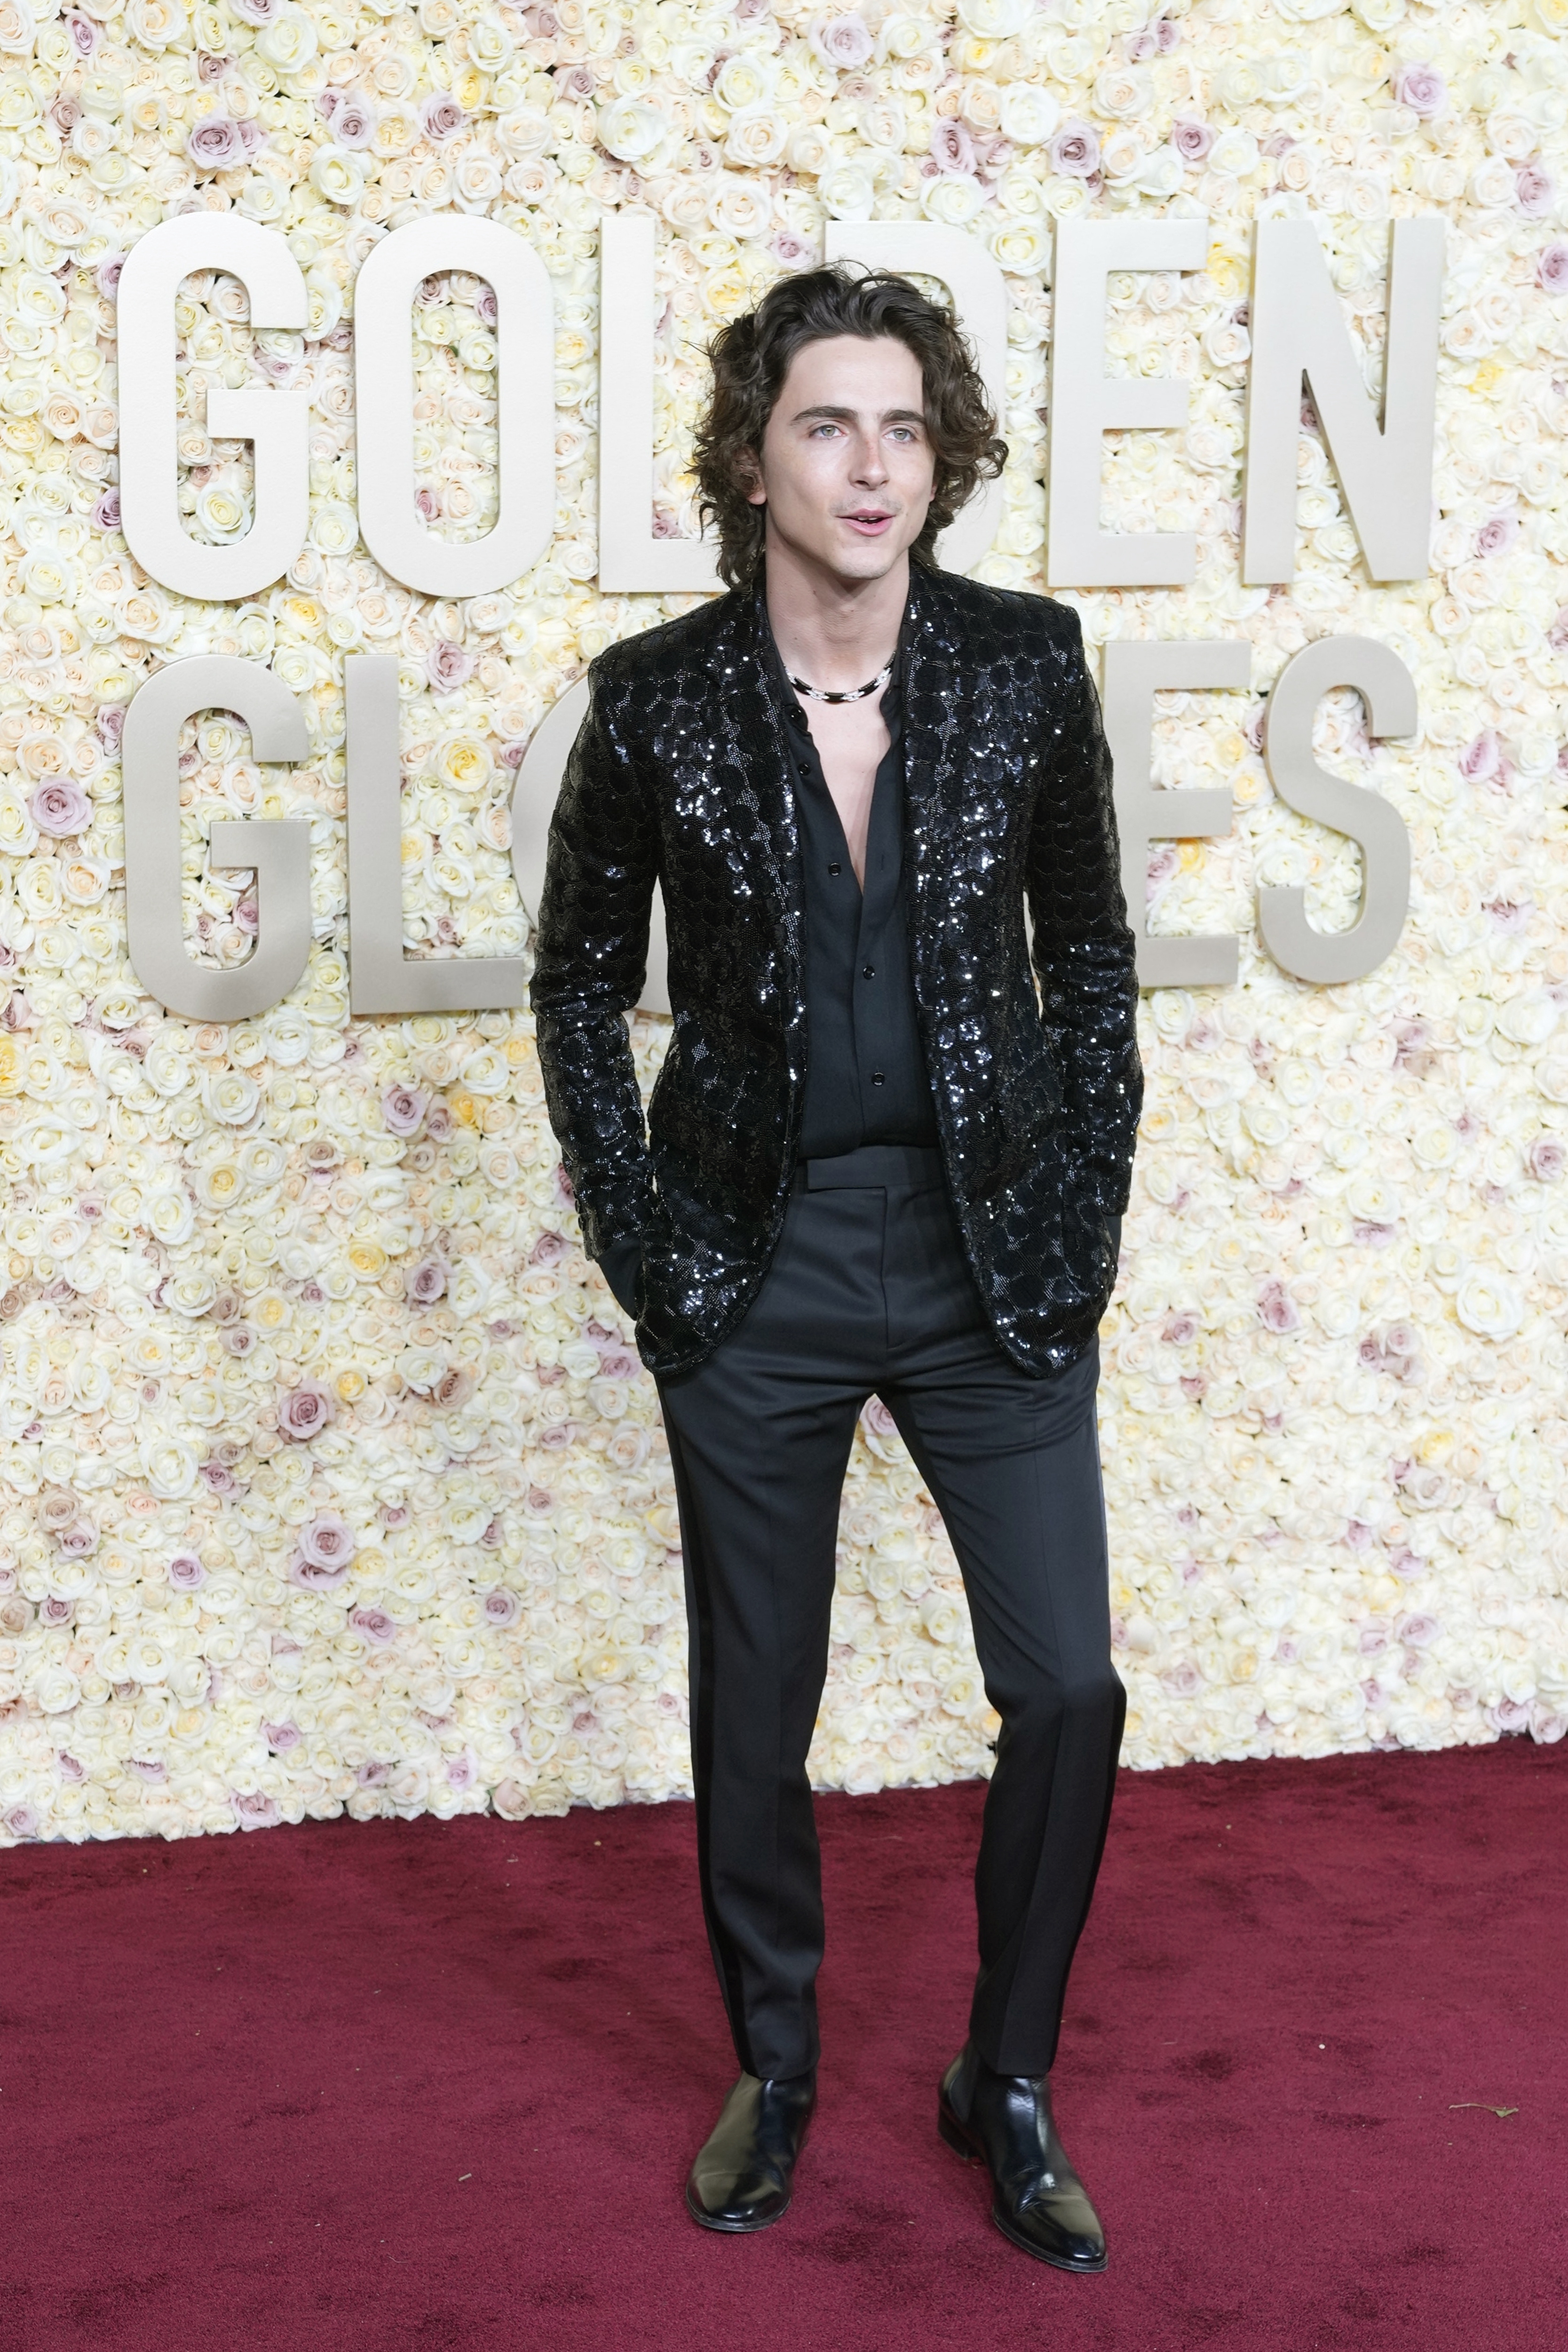 Timothee looked dapper in a sequin tux